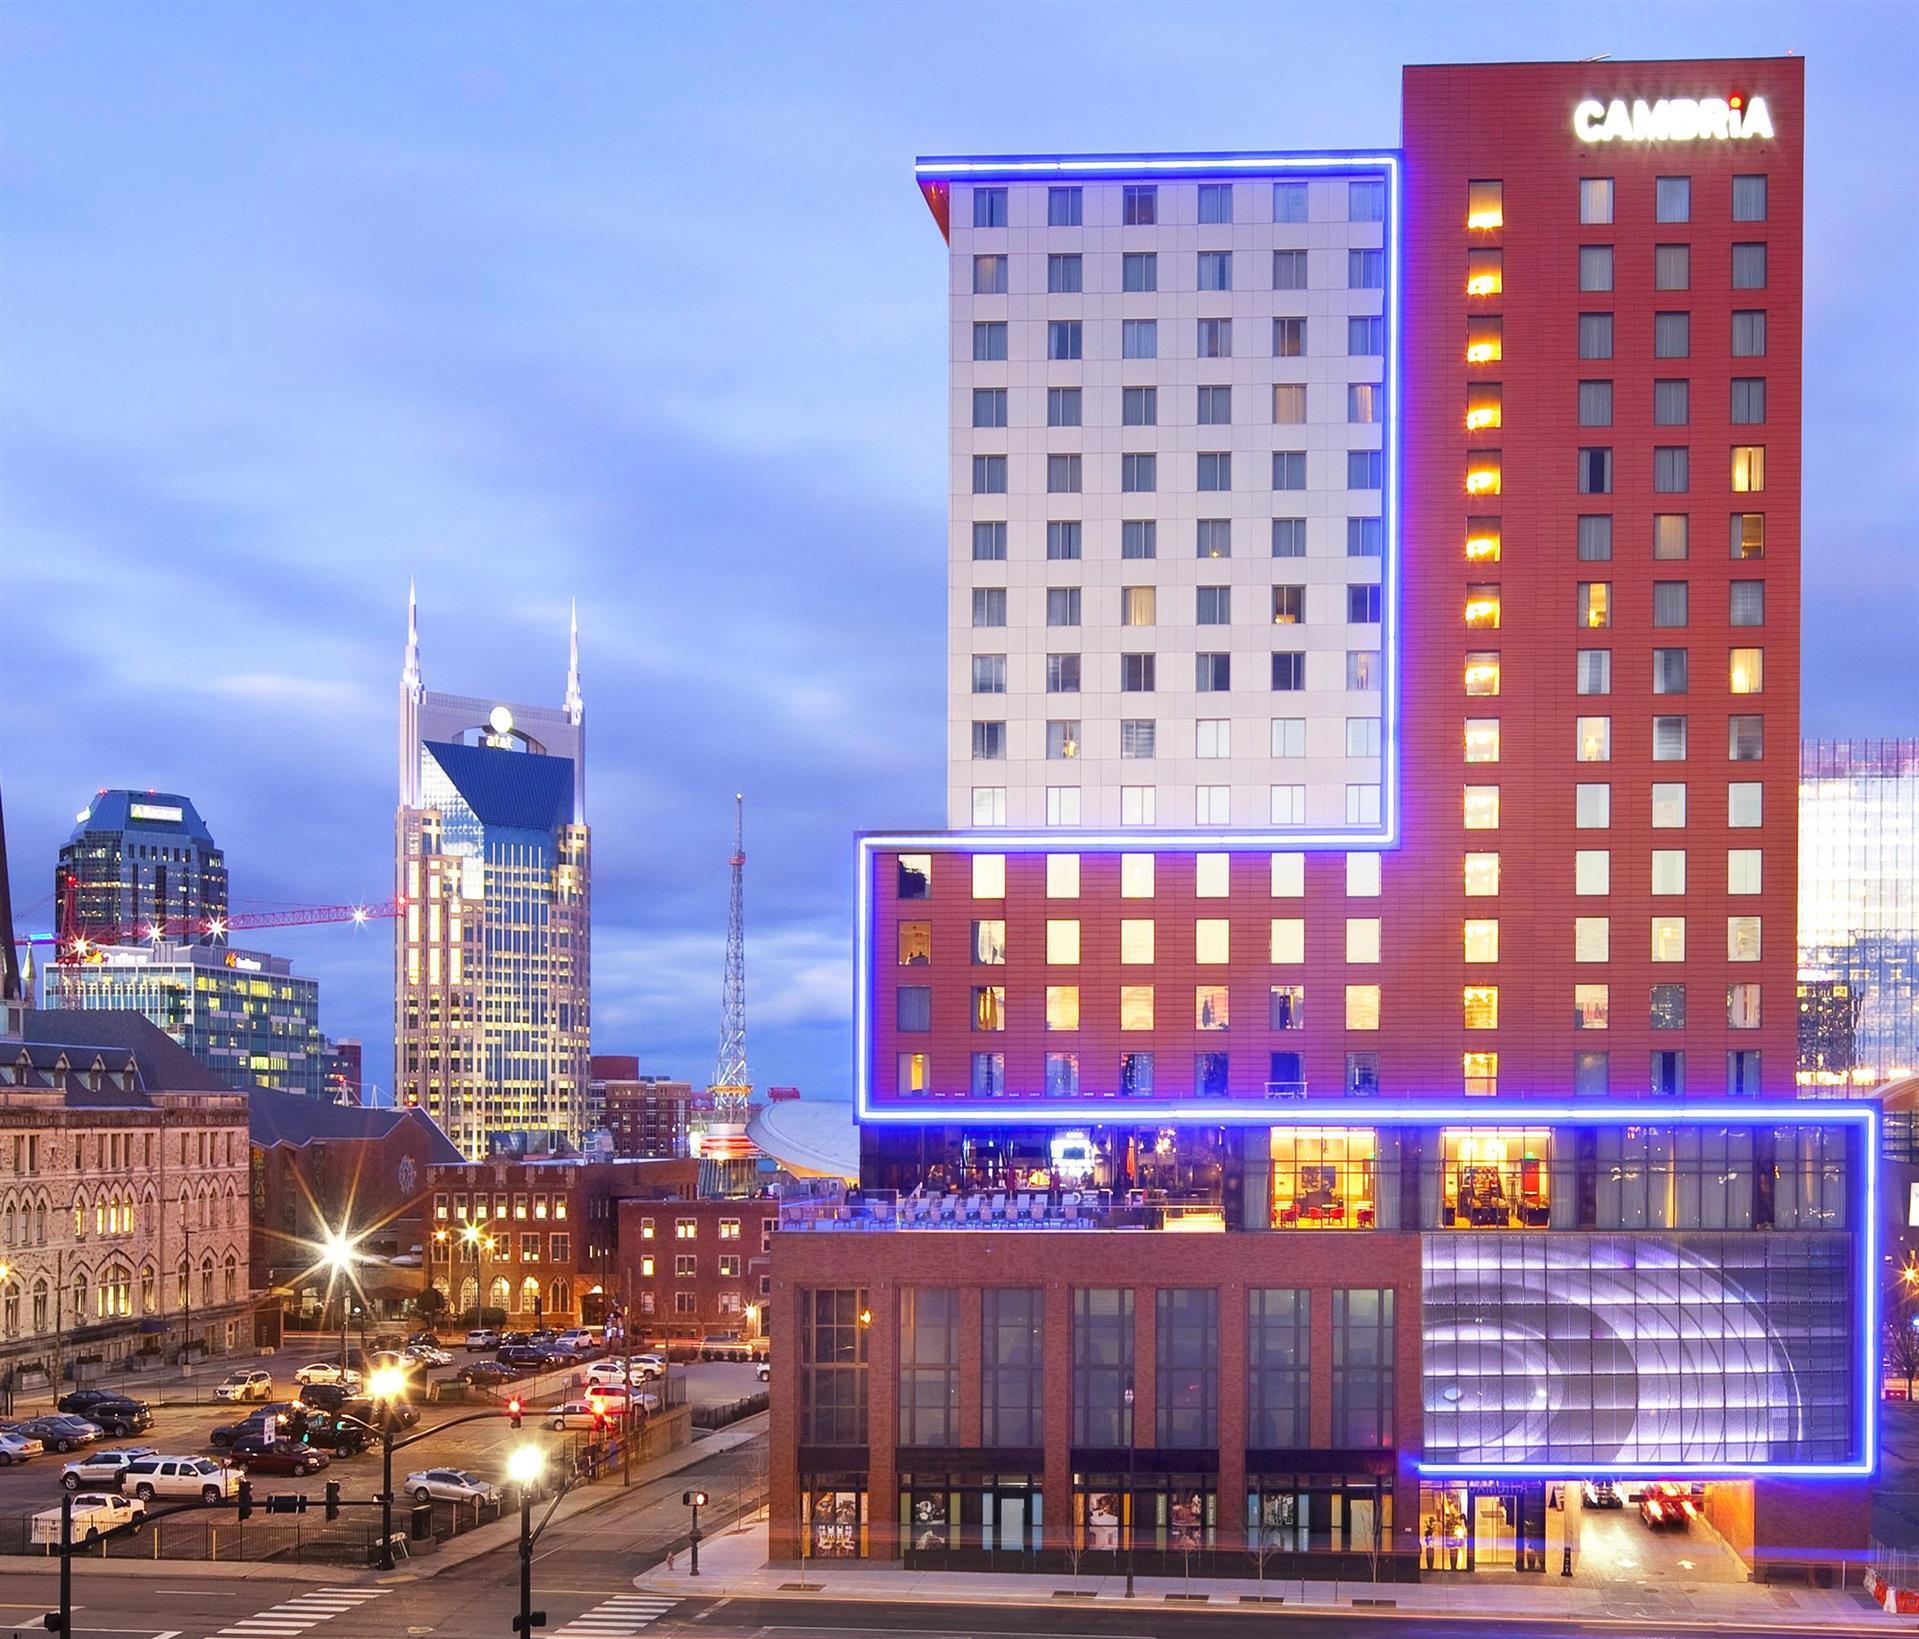 Cambria Nashville Downtown (Gold Hotel of the Year, Choice Hotels) in Nashville, TN